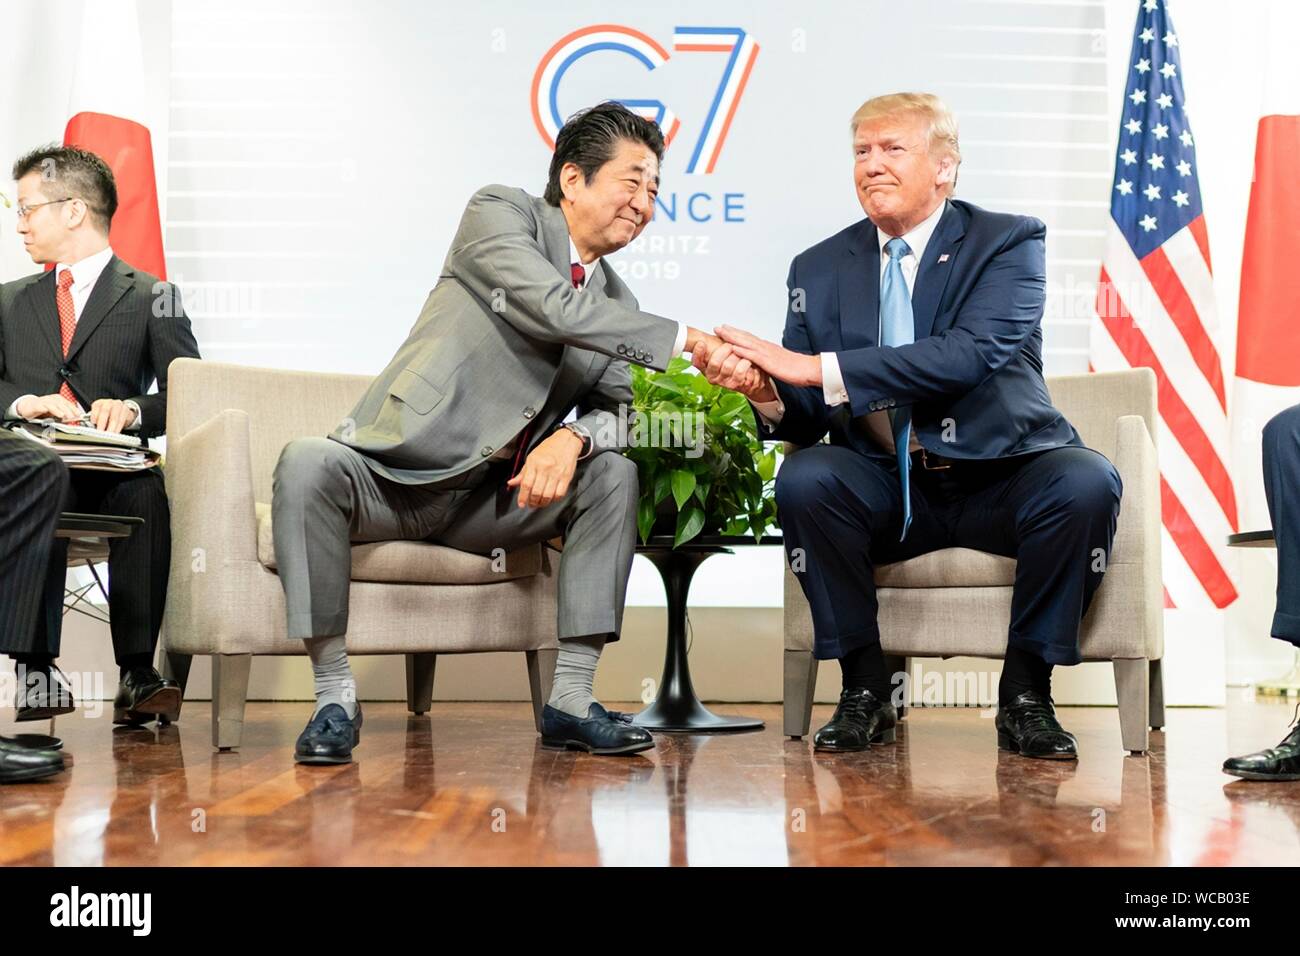 U.S. President Donald Trump shakes hands with Japanese Prime Minister Shinzo Abe, left, prior to their trade meeting on the sidelines of the G7 Summit at the Centre de Congrés Bellevue August 25, 2019 in Biarritz, France. Stock Photo